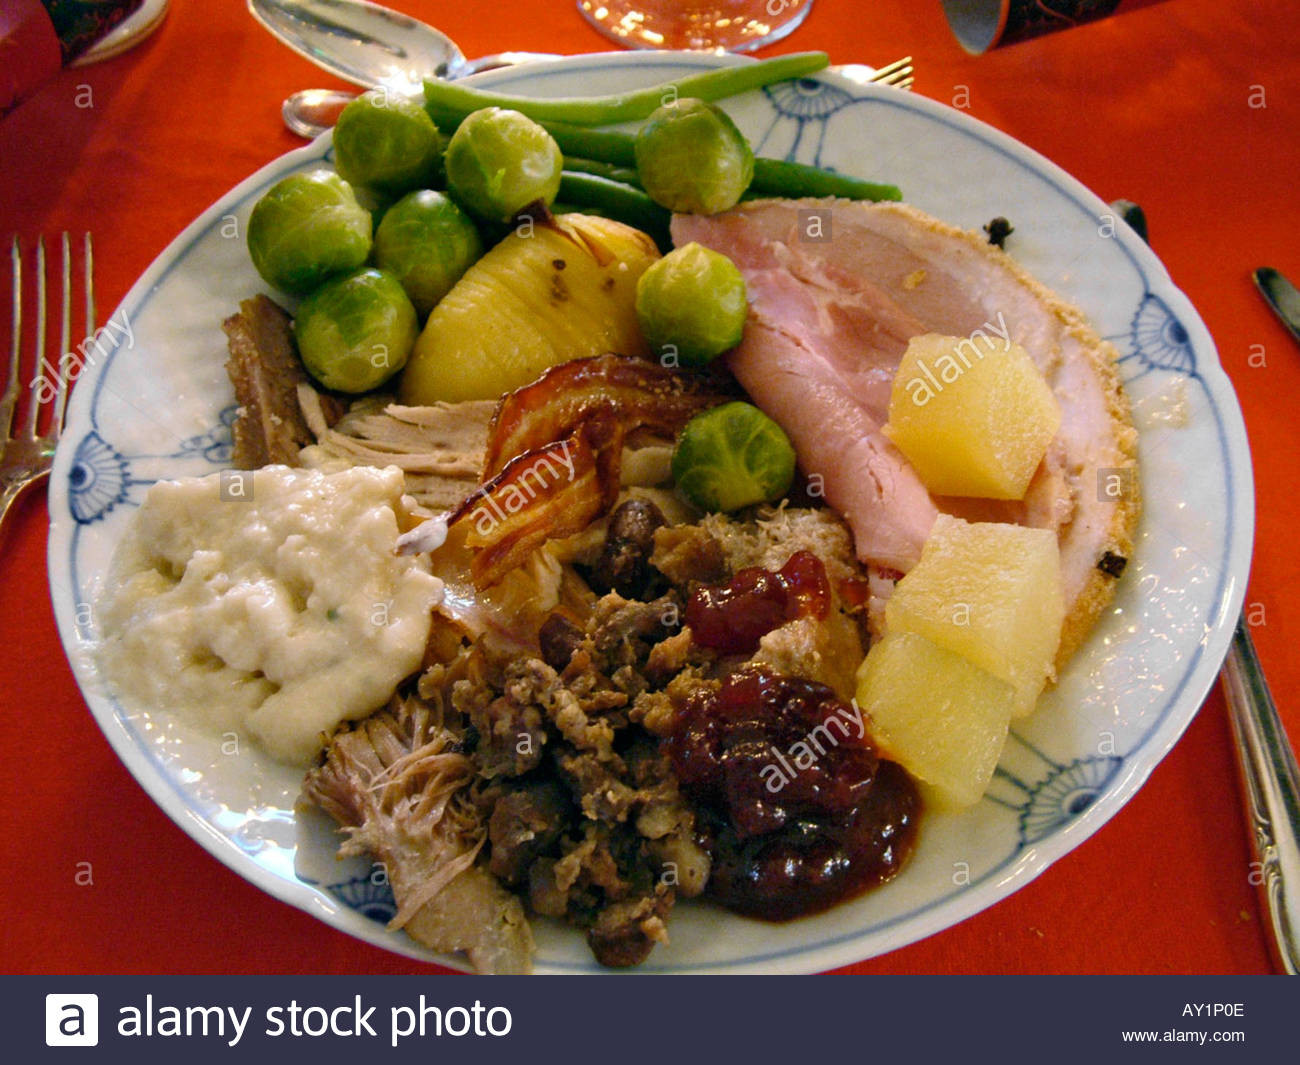 The Best Ideas for British Christmas Dinner – Best Diet and Healthy ...